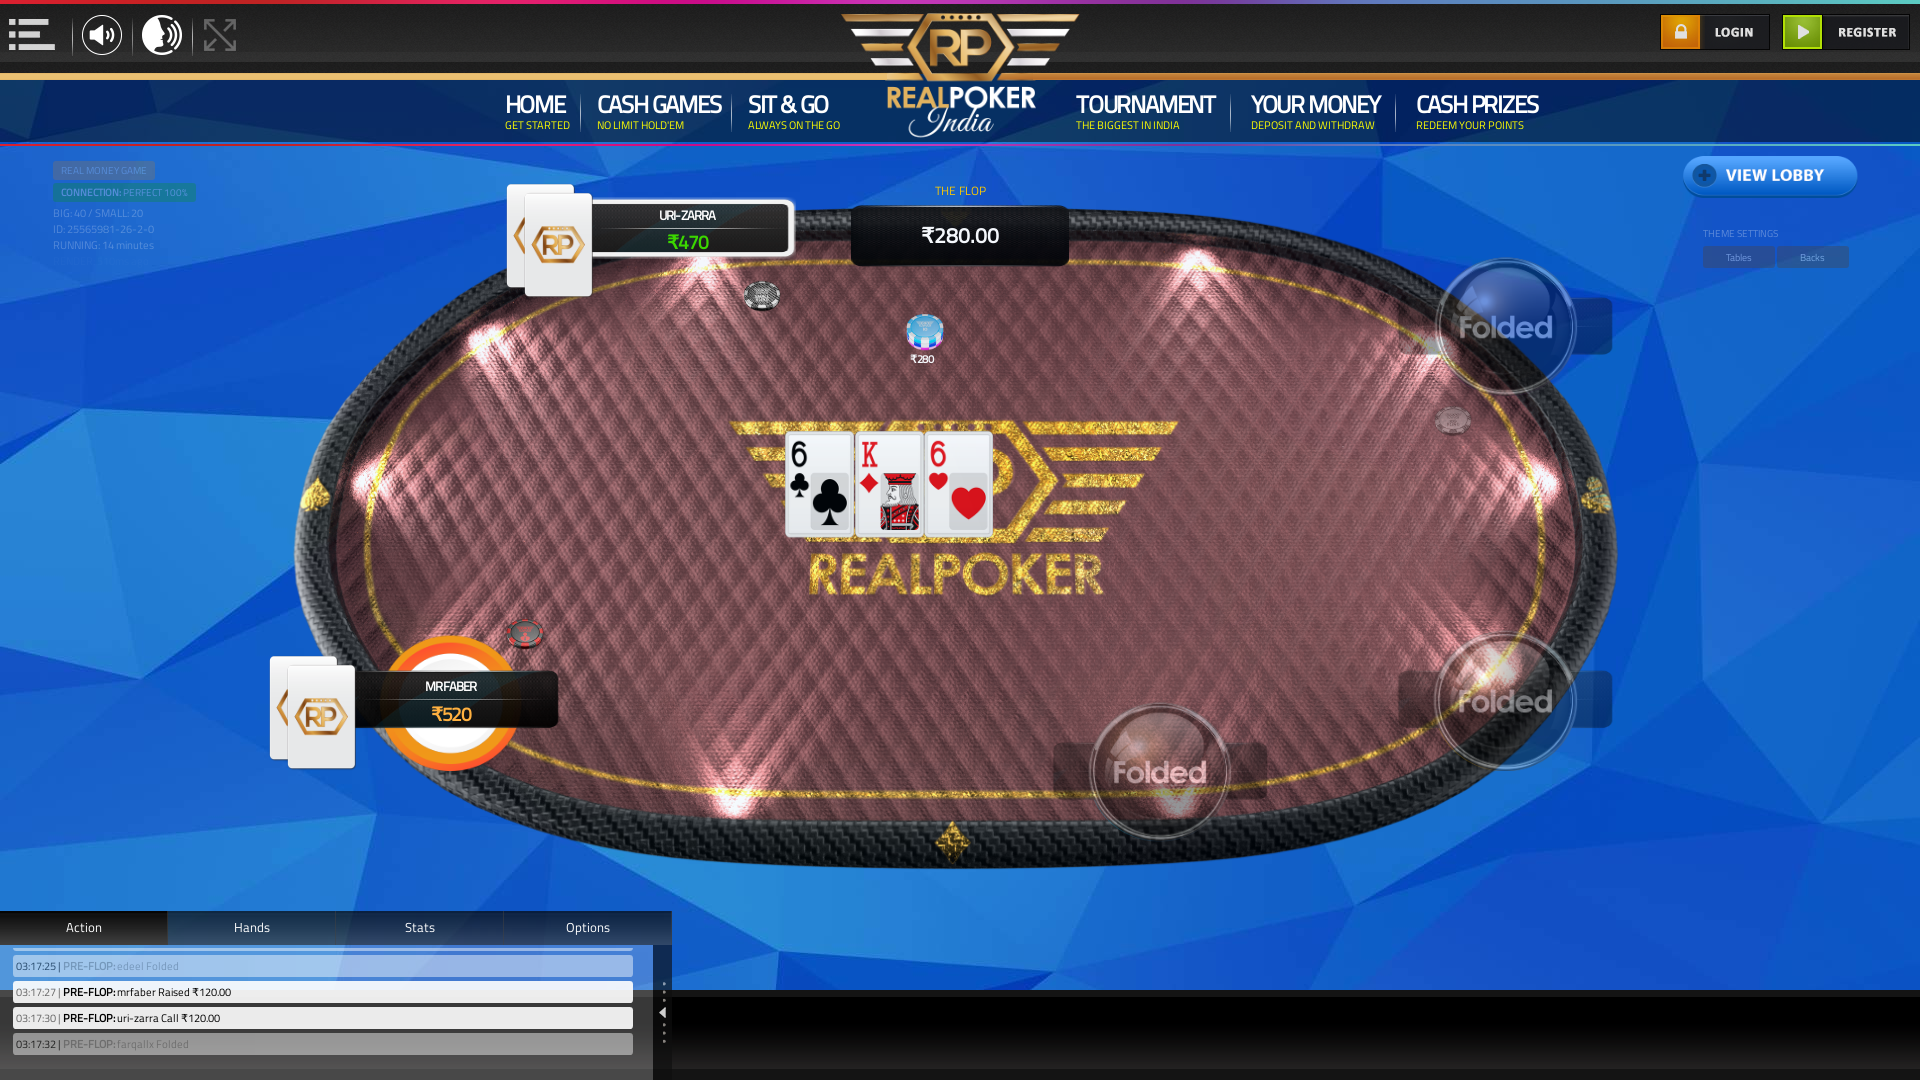 Real indian poker on a 10 player table in the 14th minute of the game